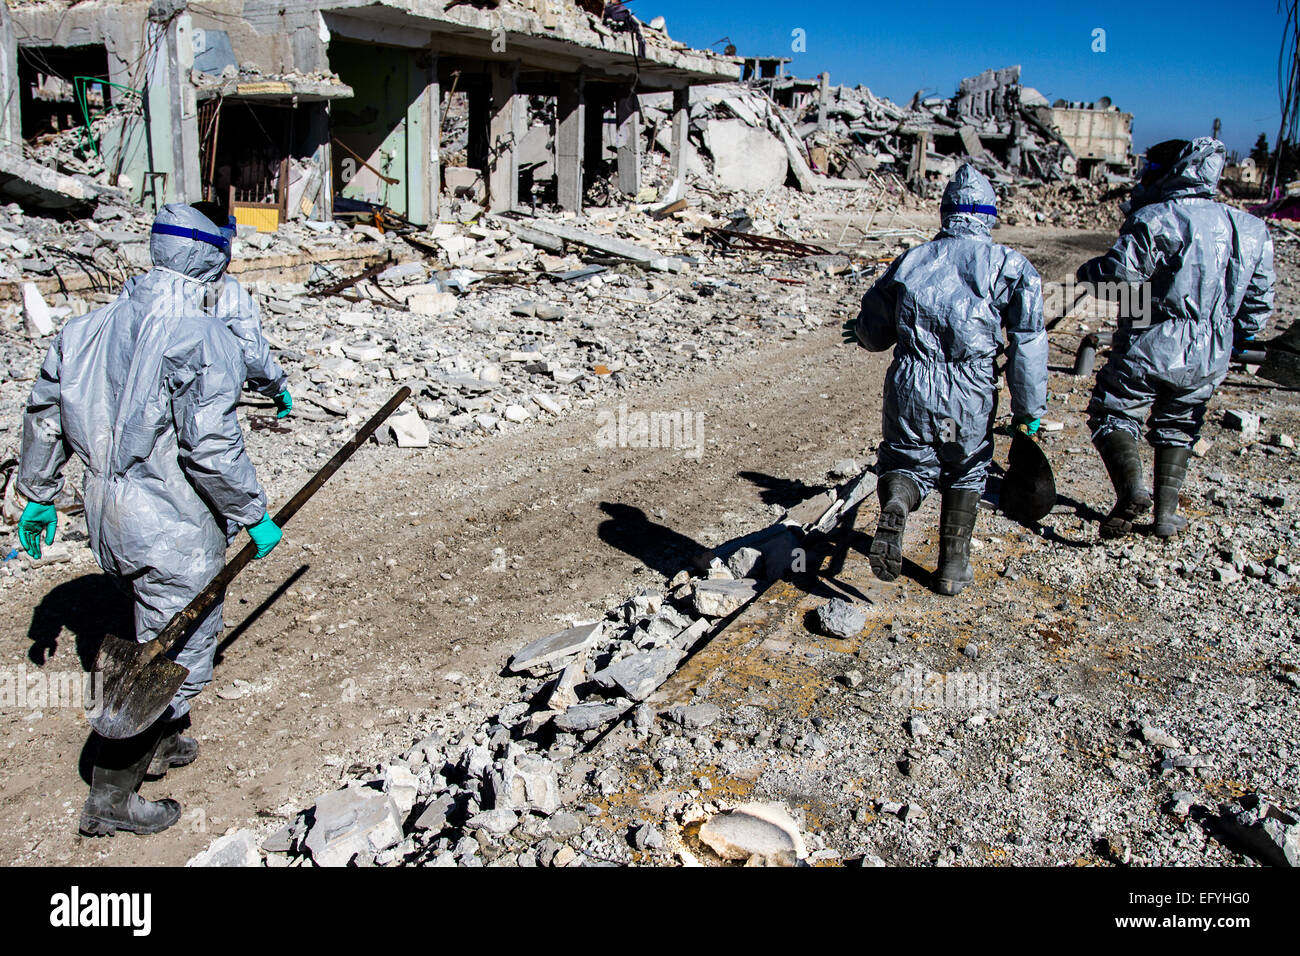 Kobane, Syria. 6th Feb, 2015. A unit of Kurdish YPG fighters wear protective suits as they search the streets for dead bodies and corpses in the ruins of Kobane, Syria, 6 February 2015. The recent fighting between Kurdish fighters and fighters of the so-called Islamic State (IS) has left vast areas of the city of Kobane in ruins. Photo: Sebastian Backhaus/dpa - NO WIRE SERVICE -/dpa/Alamy Live News Stock Photo